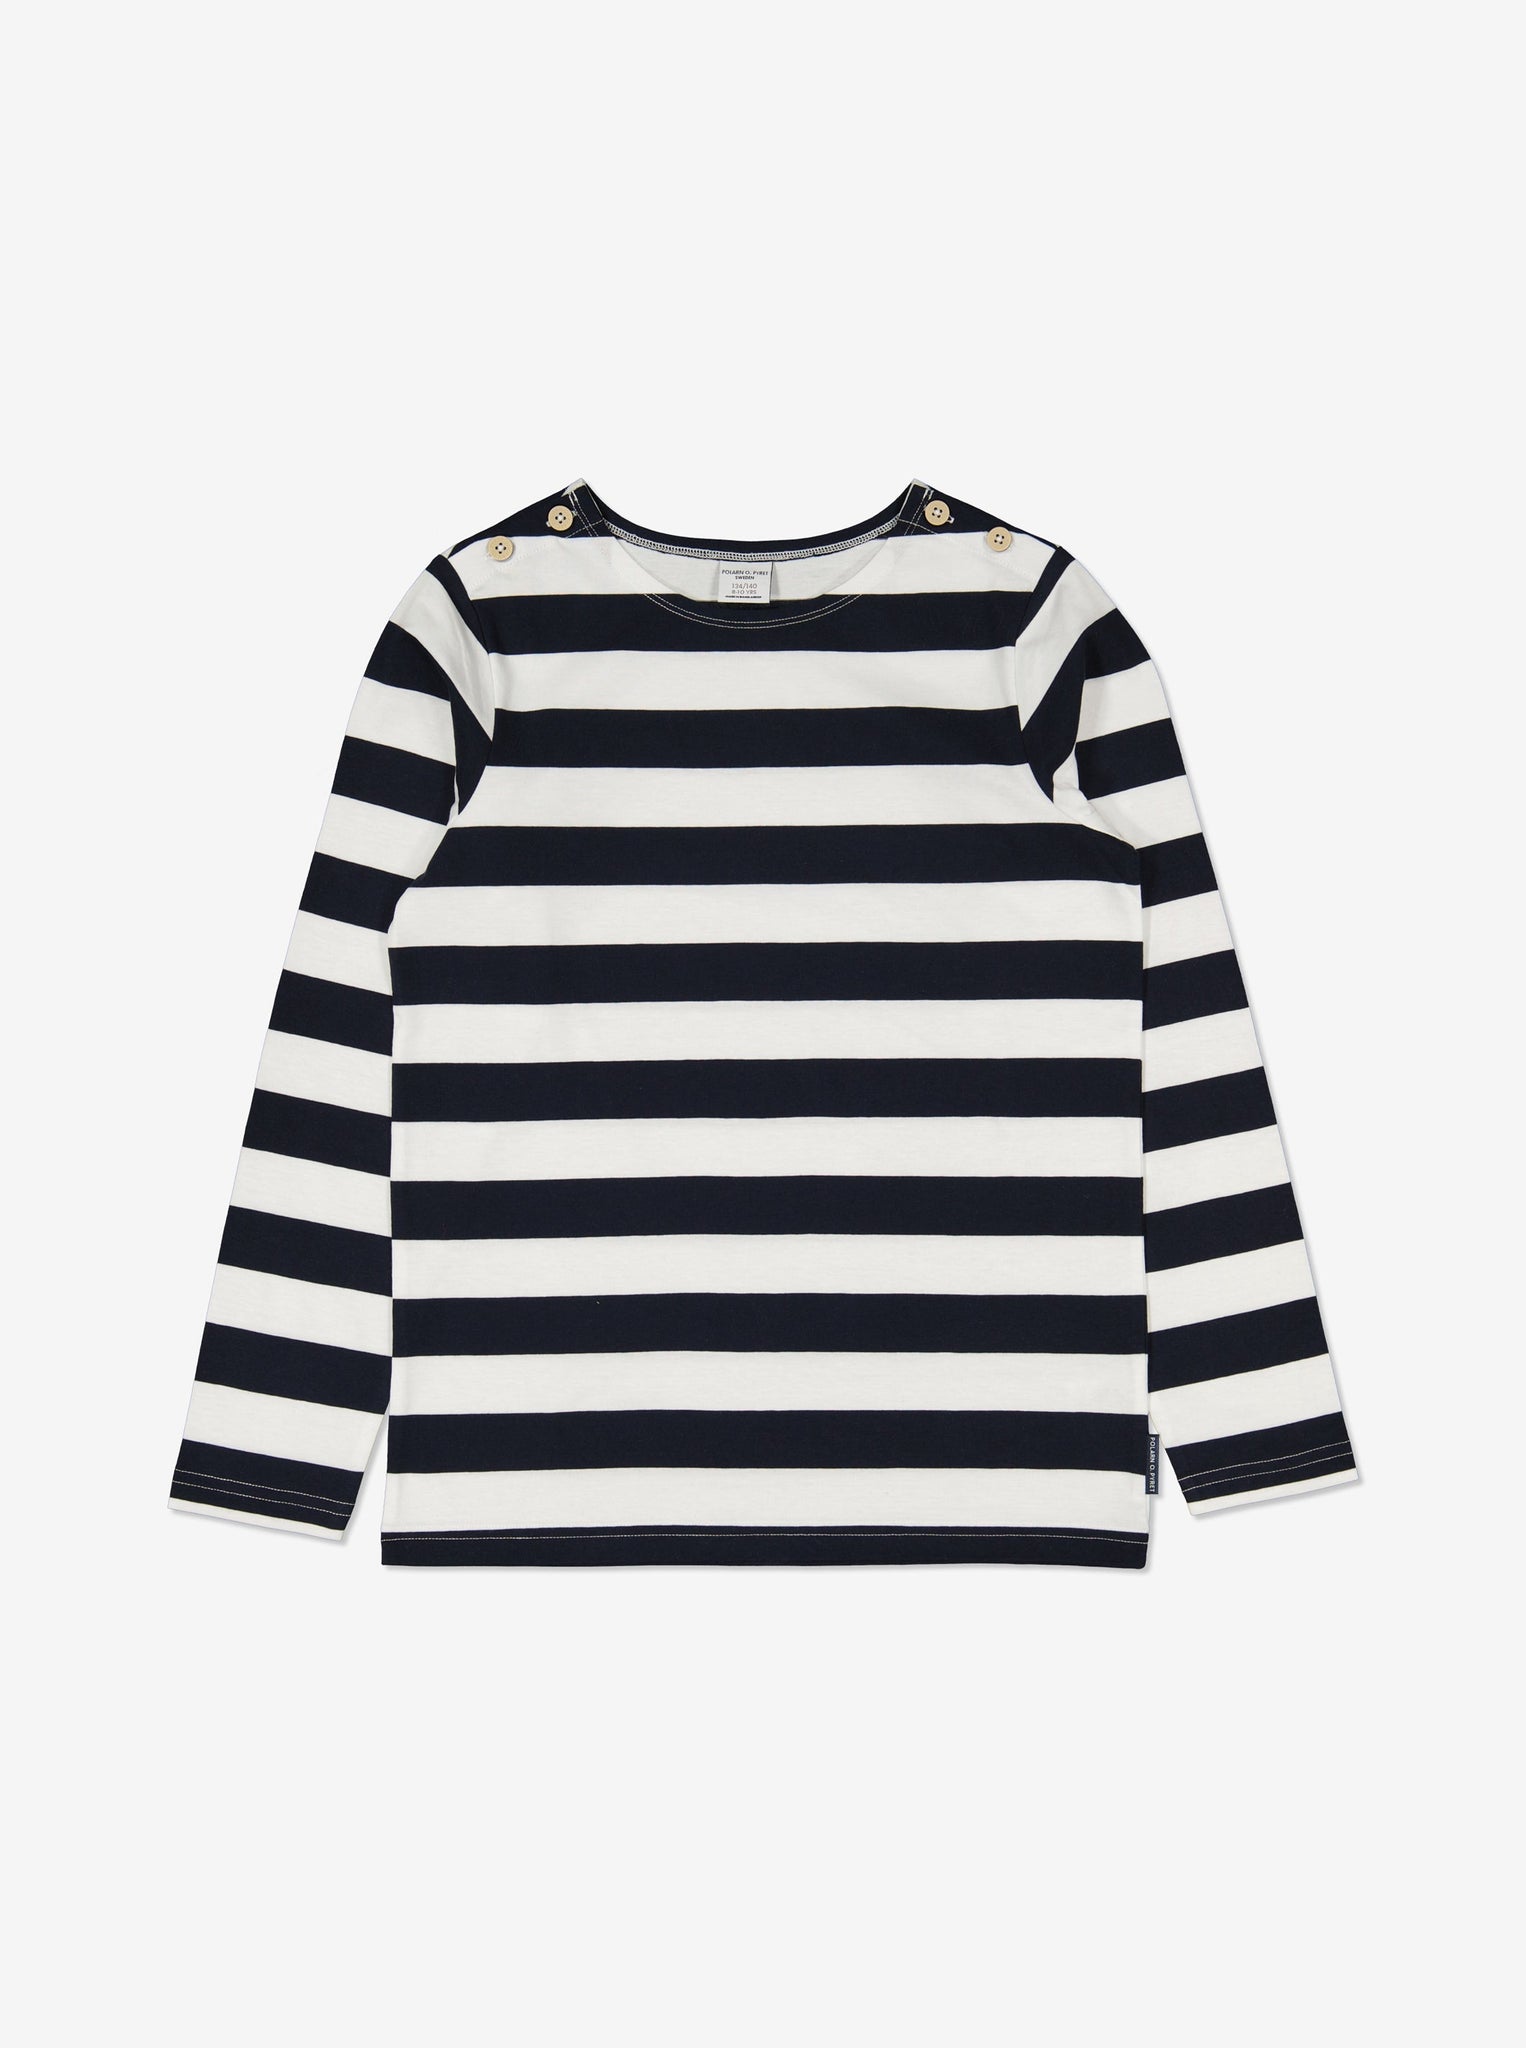 Striped Navy Unisex Kids Top from Polarn O. Pyret Kidswear. Made from 100% GOTS Organic Cotton.